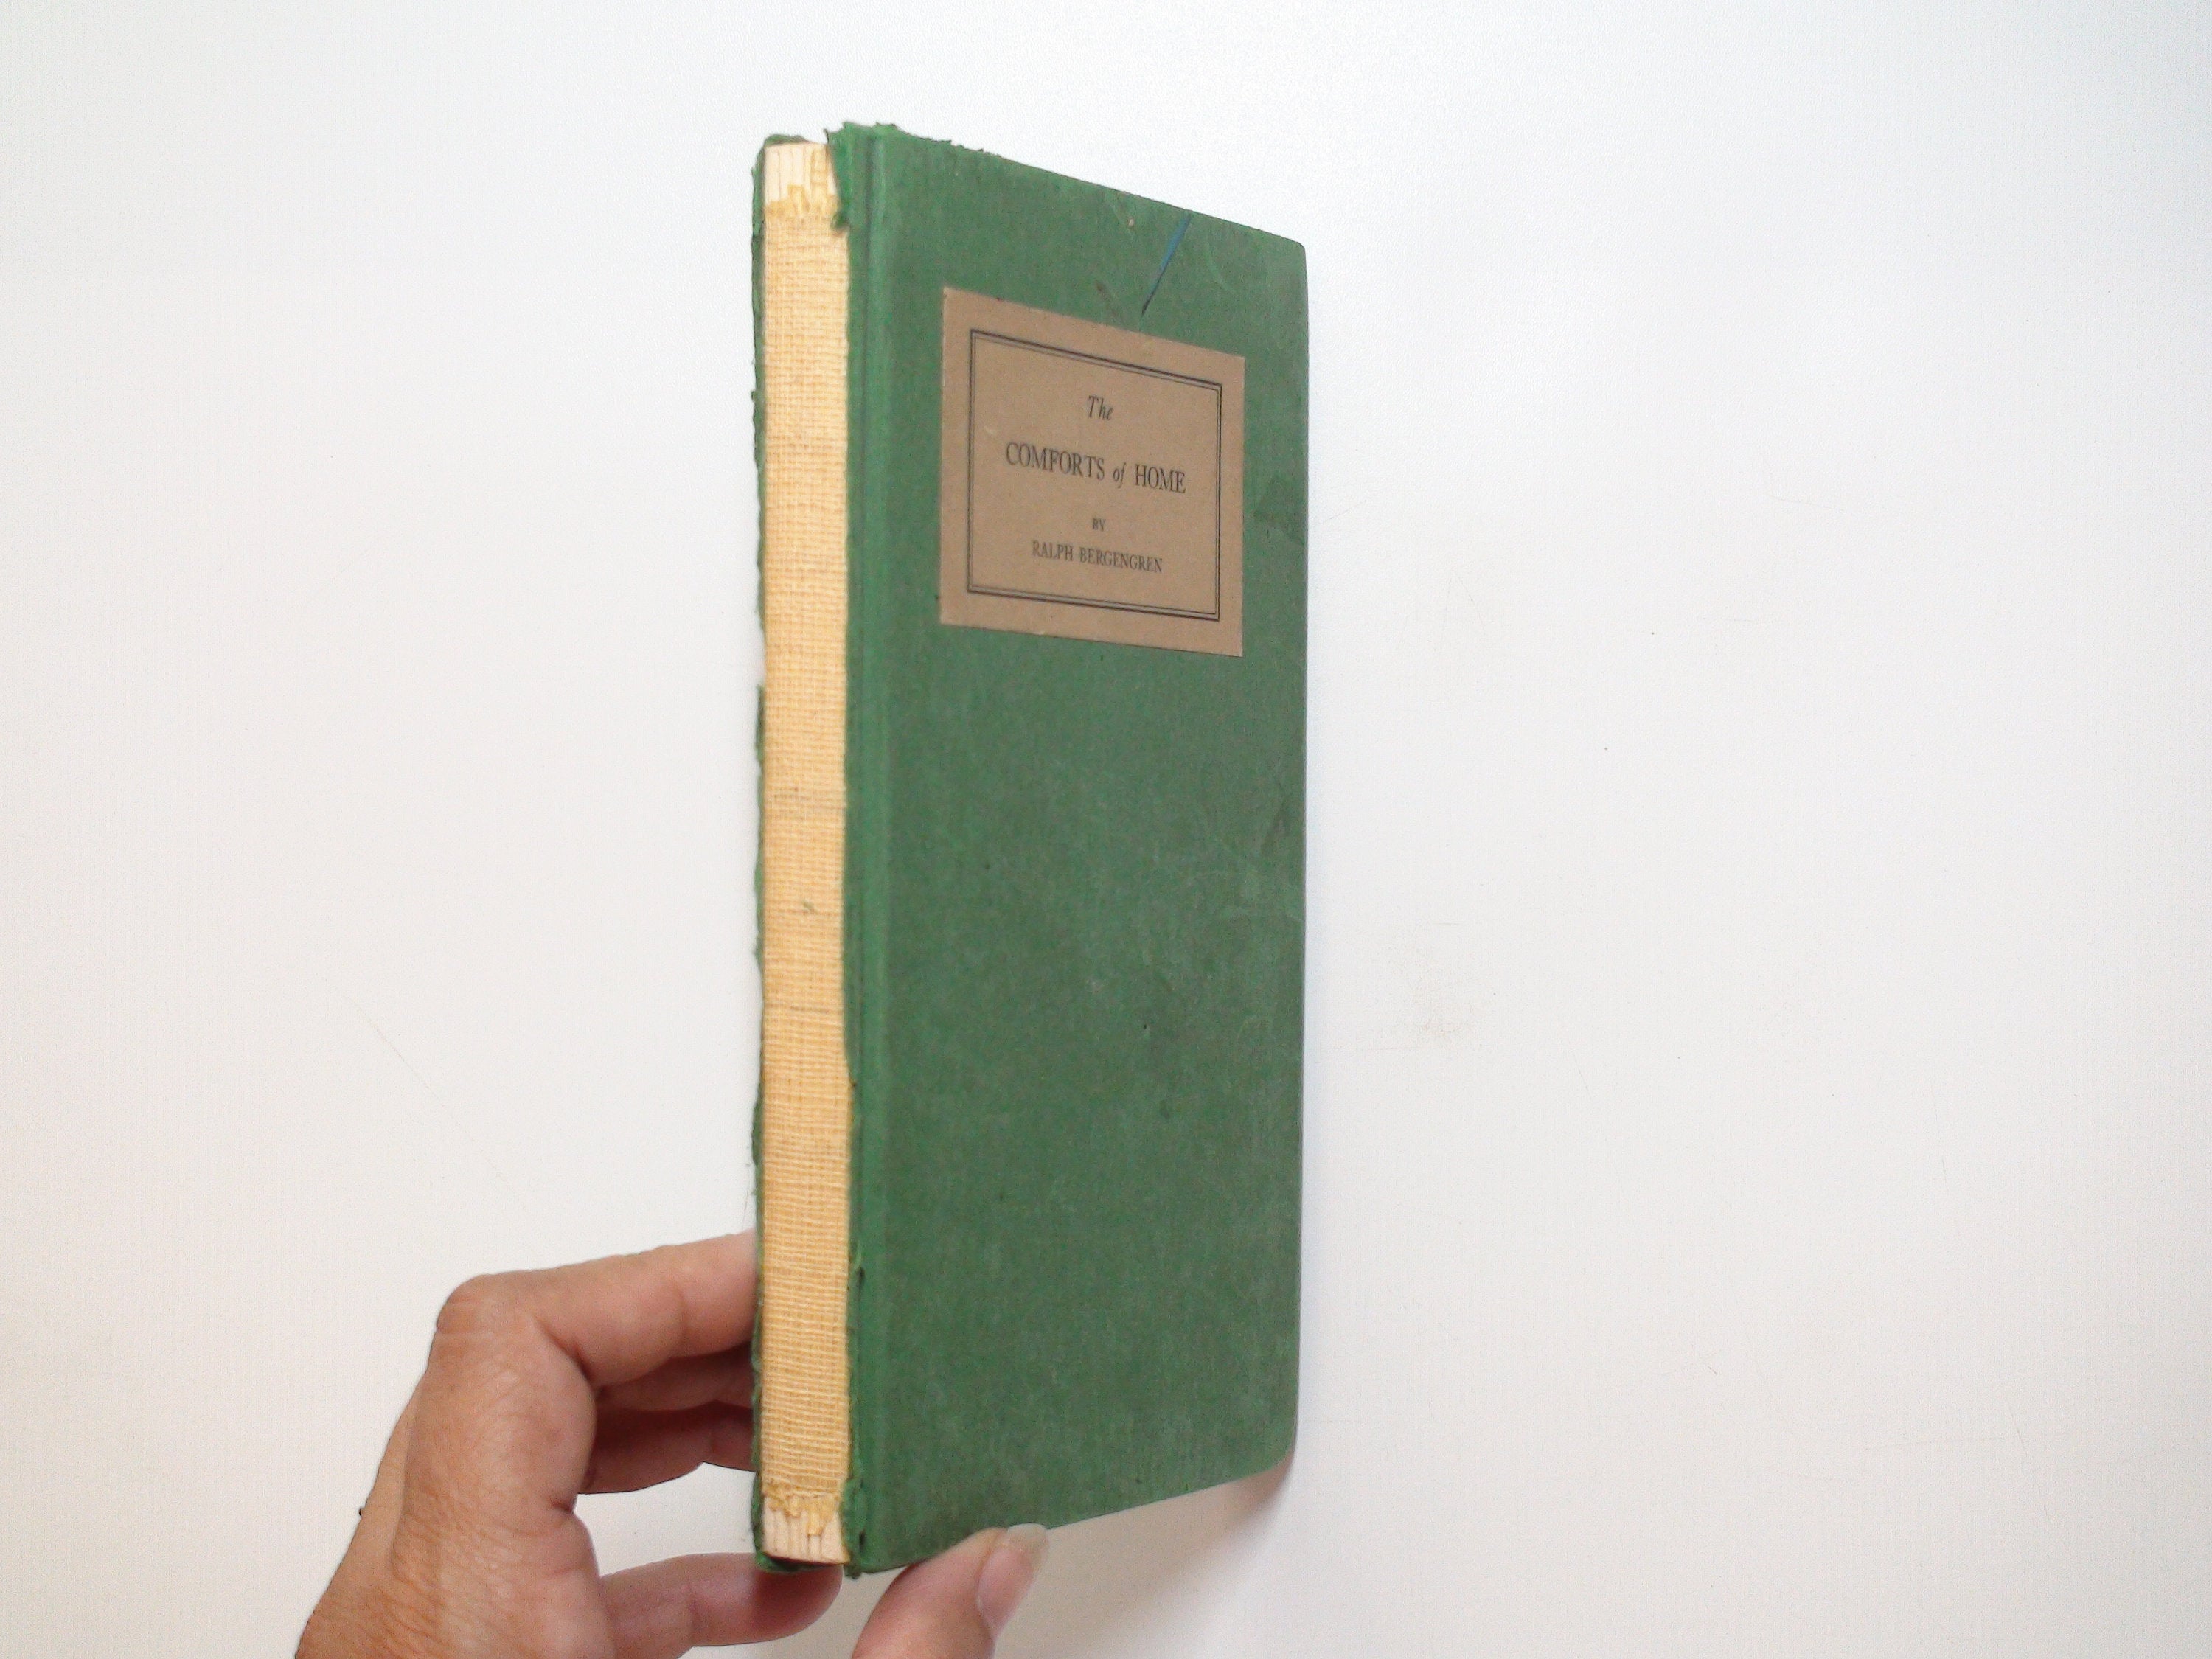 The Comforts of Home, Ralph Bergengren, 1st Ed, 1918